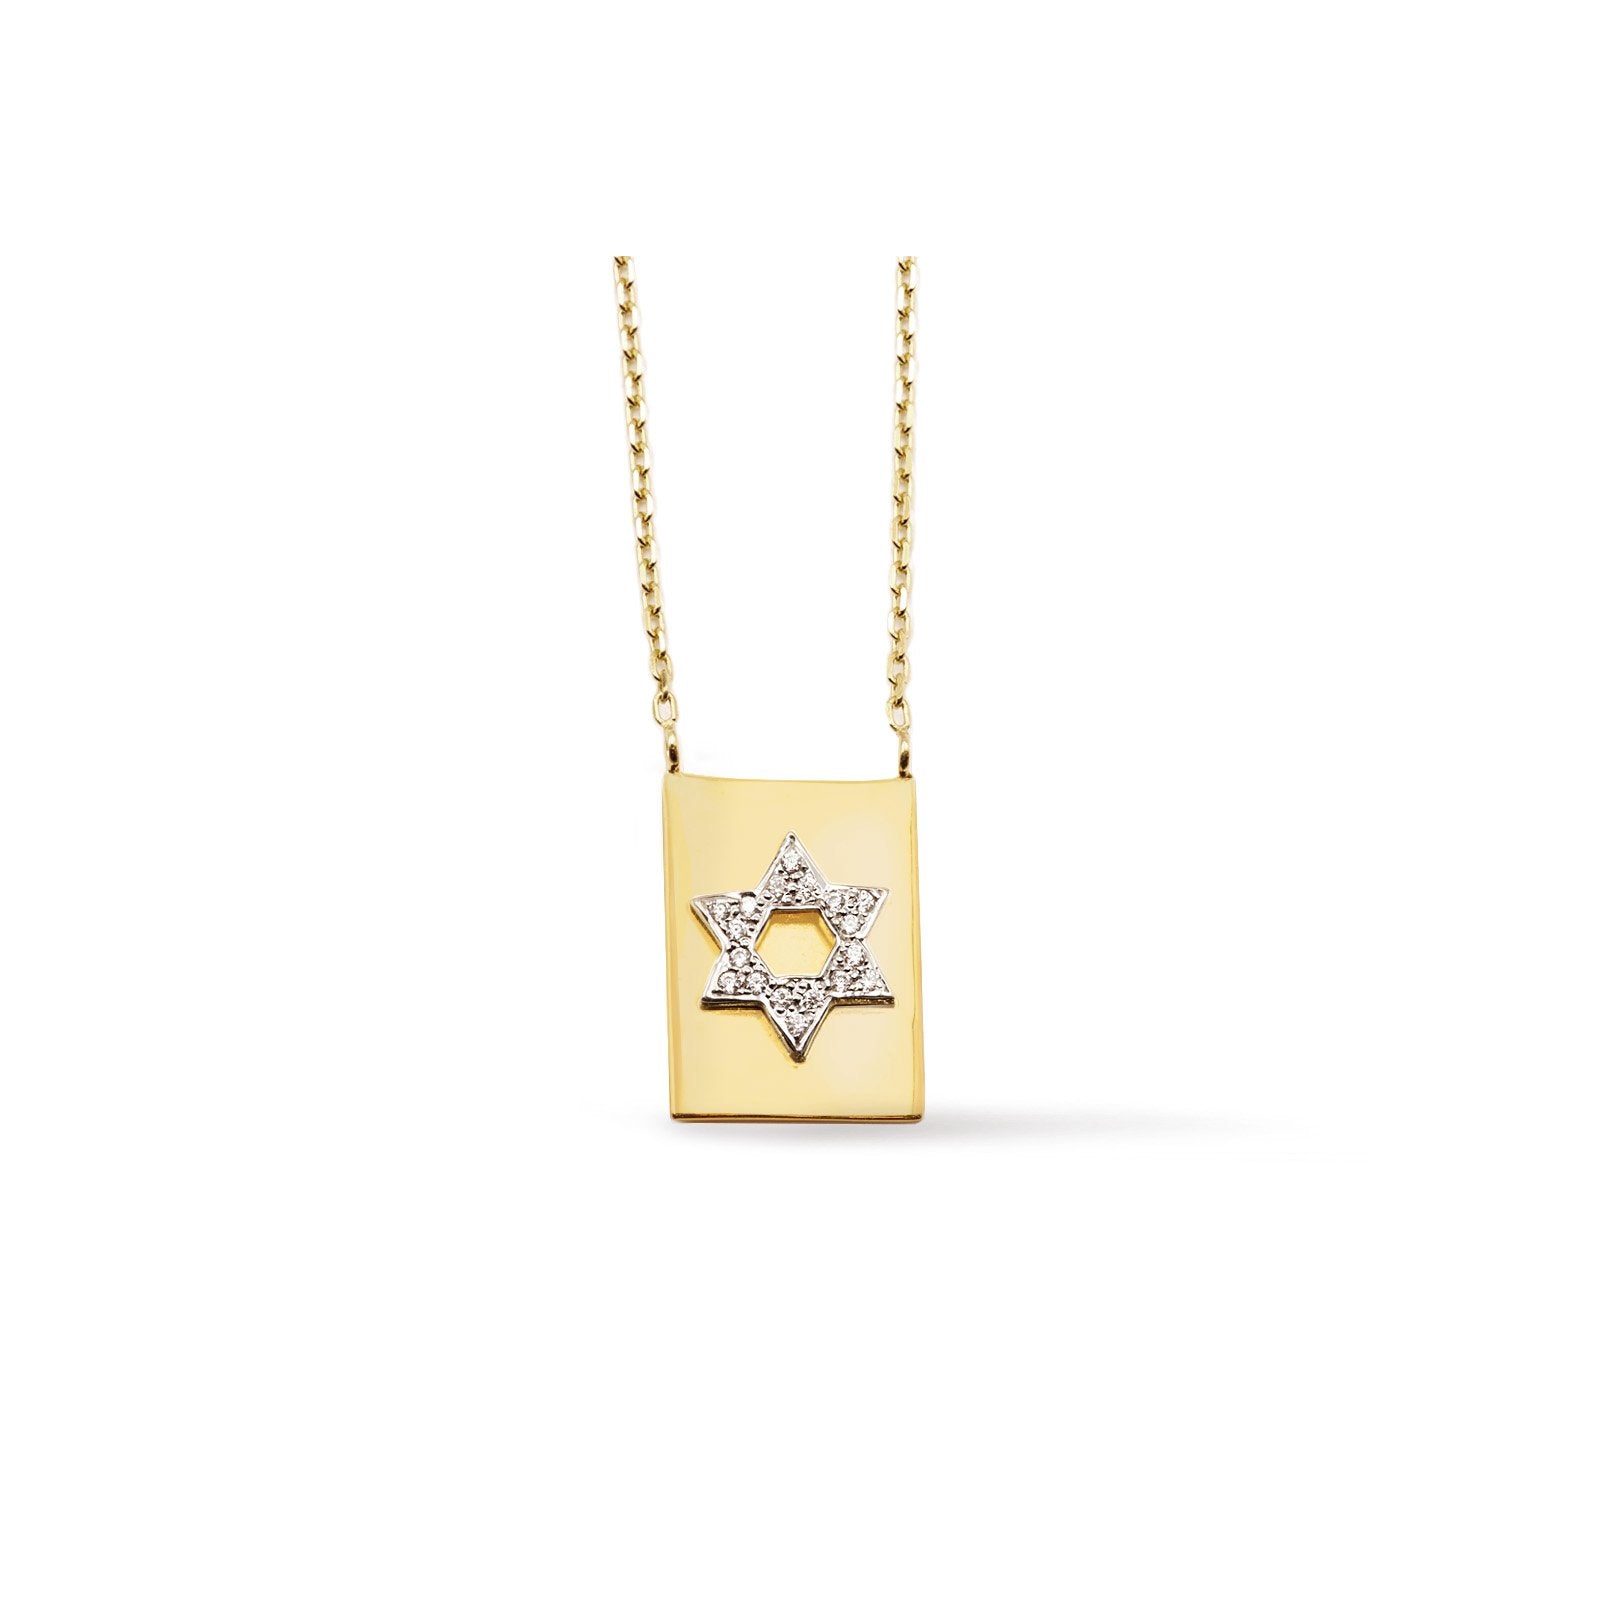 Vermeil &amp; Sterling Silver - Pave Star of David Scapular Necklace - Camille Jewelry